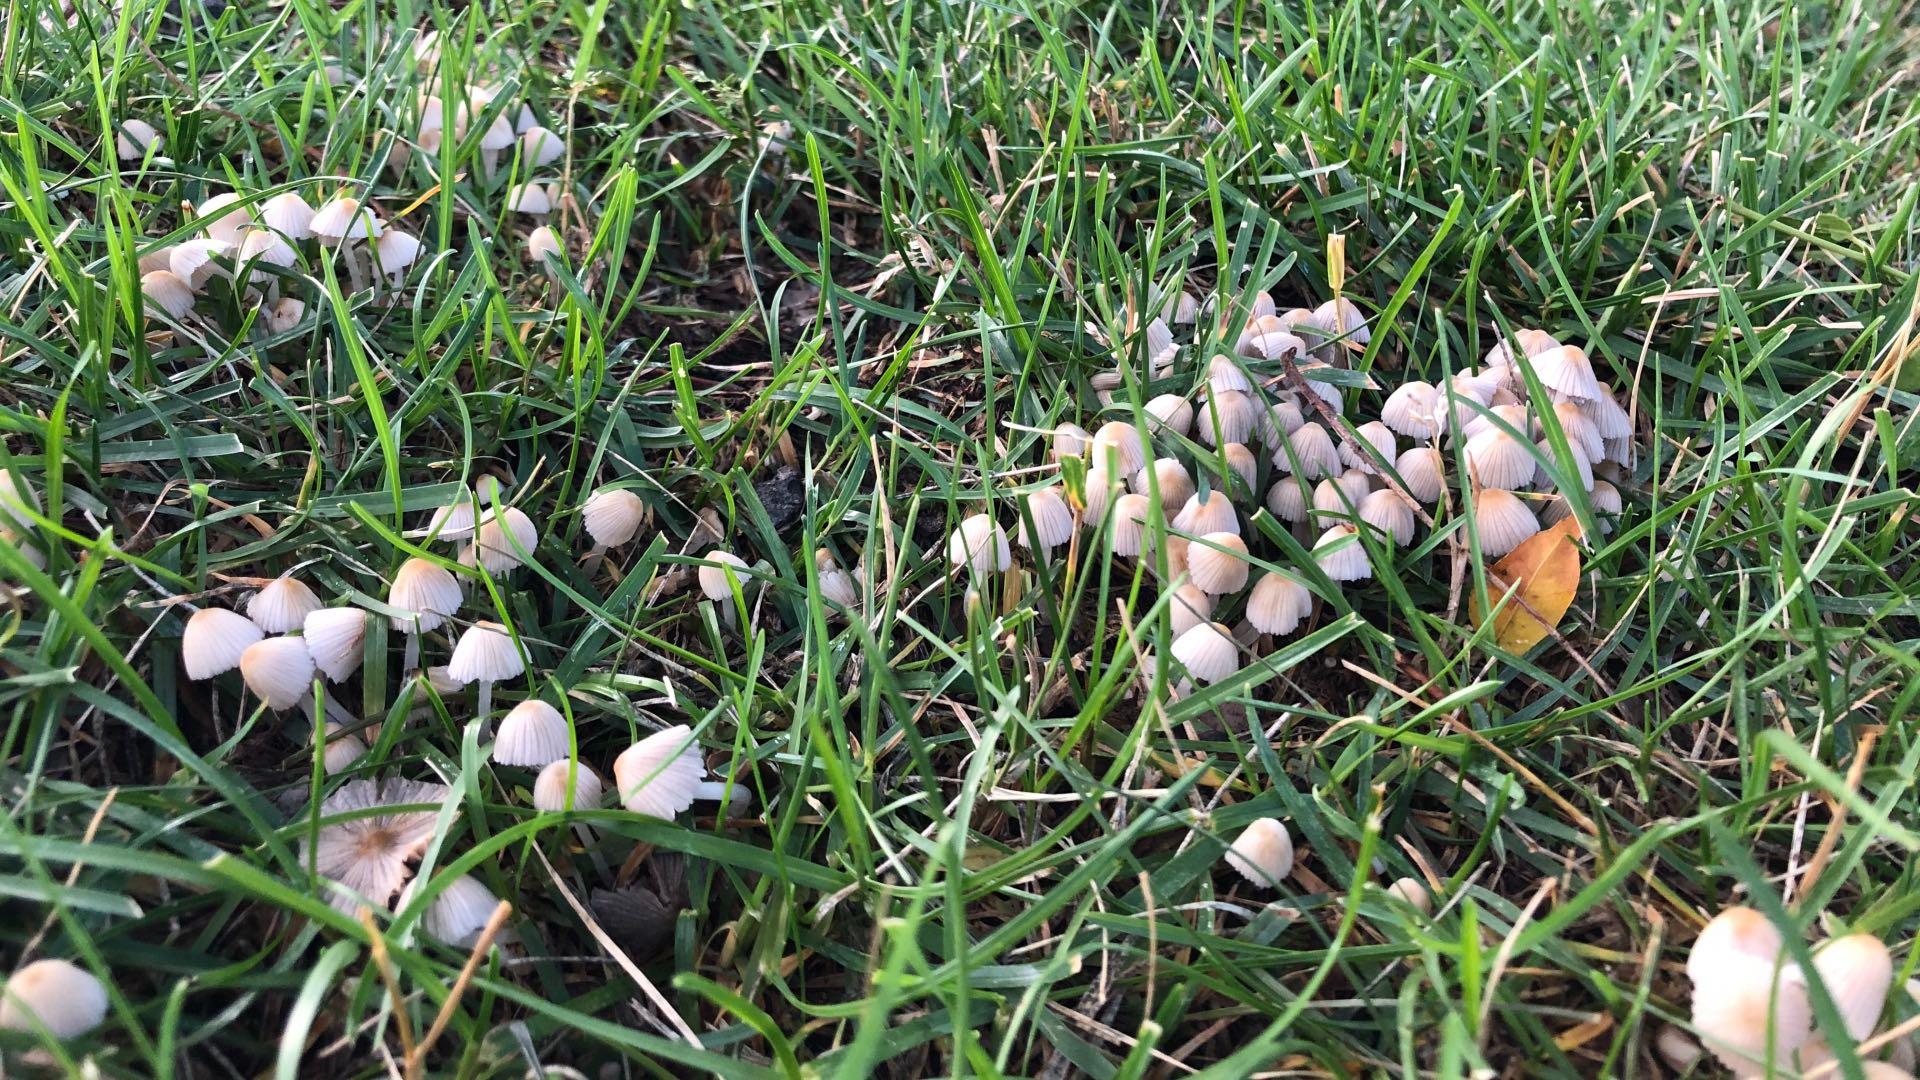 Mushrooms are the fruiting of fungi that live in the soil. (Patty Wetli / WTTW News